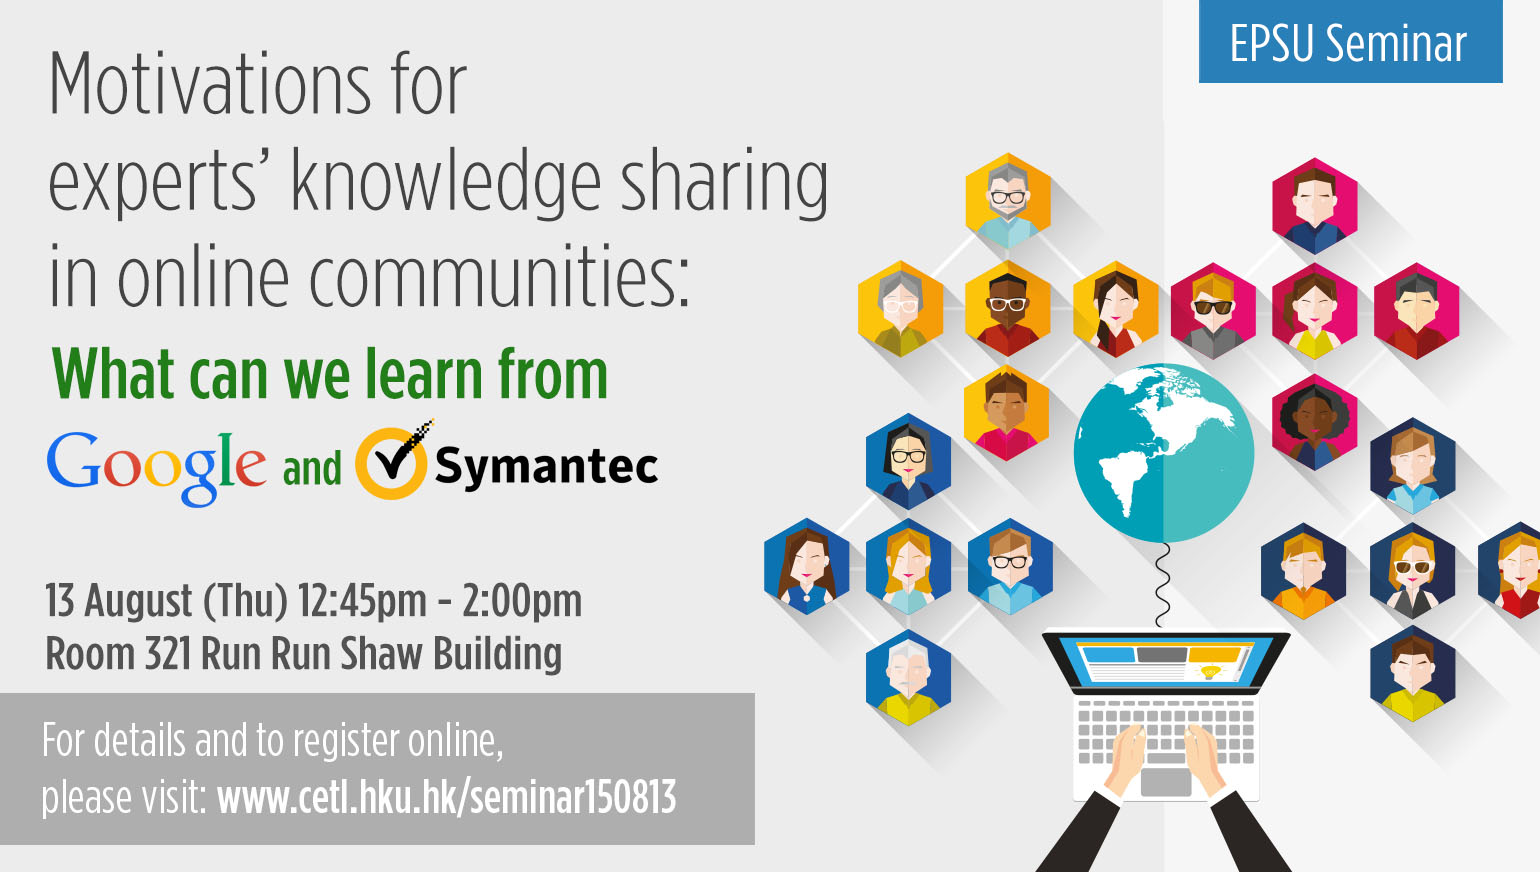 EPSU Seminar - Motivations for experts' knowledge sharing in online communities: What can we learn from Google and Symantec